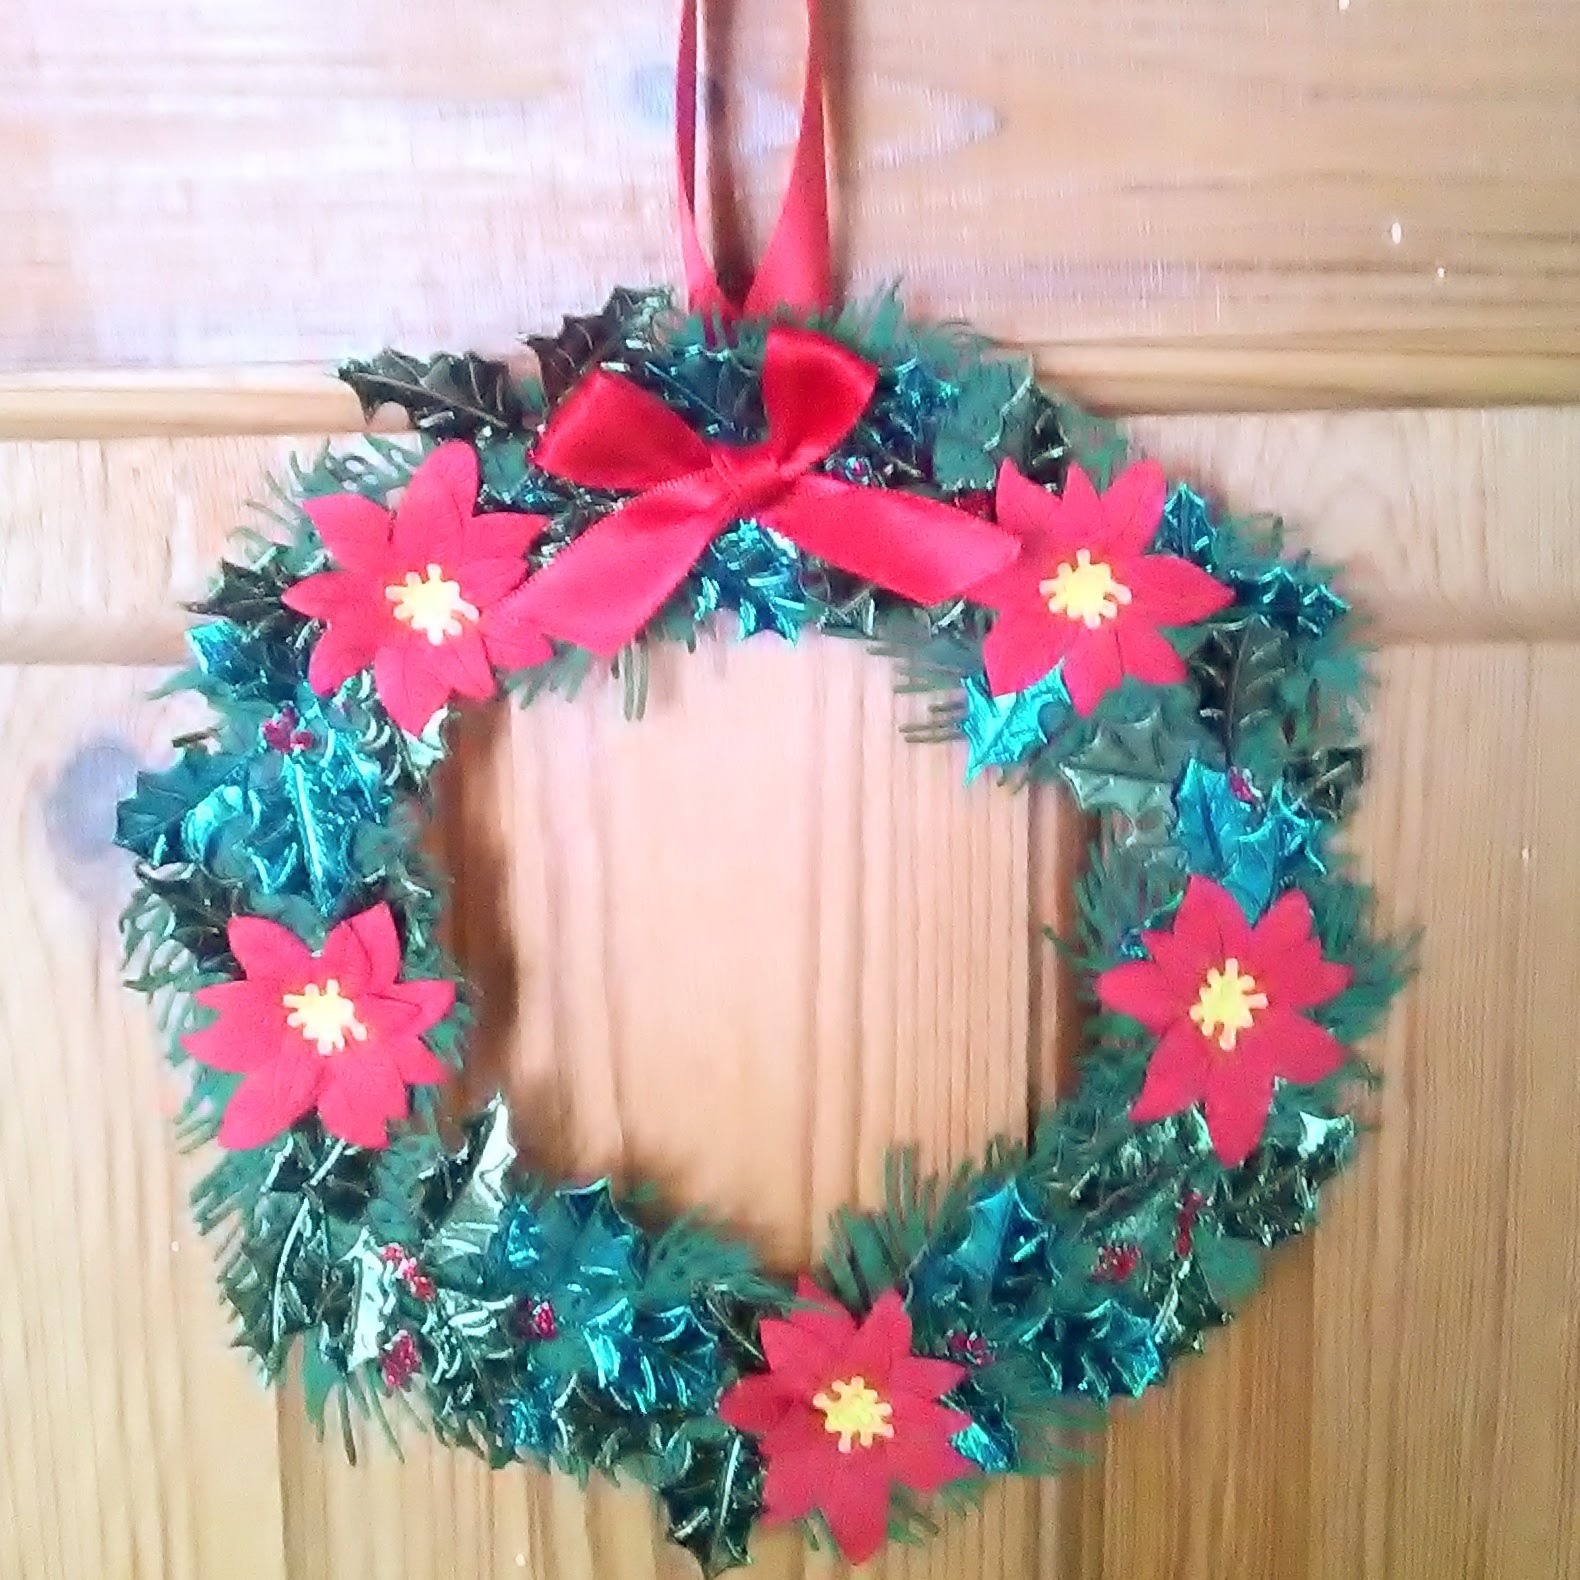 Merry Makewell Makes...: Christmas Decorations - Indoor Wreath